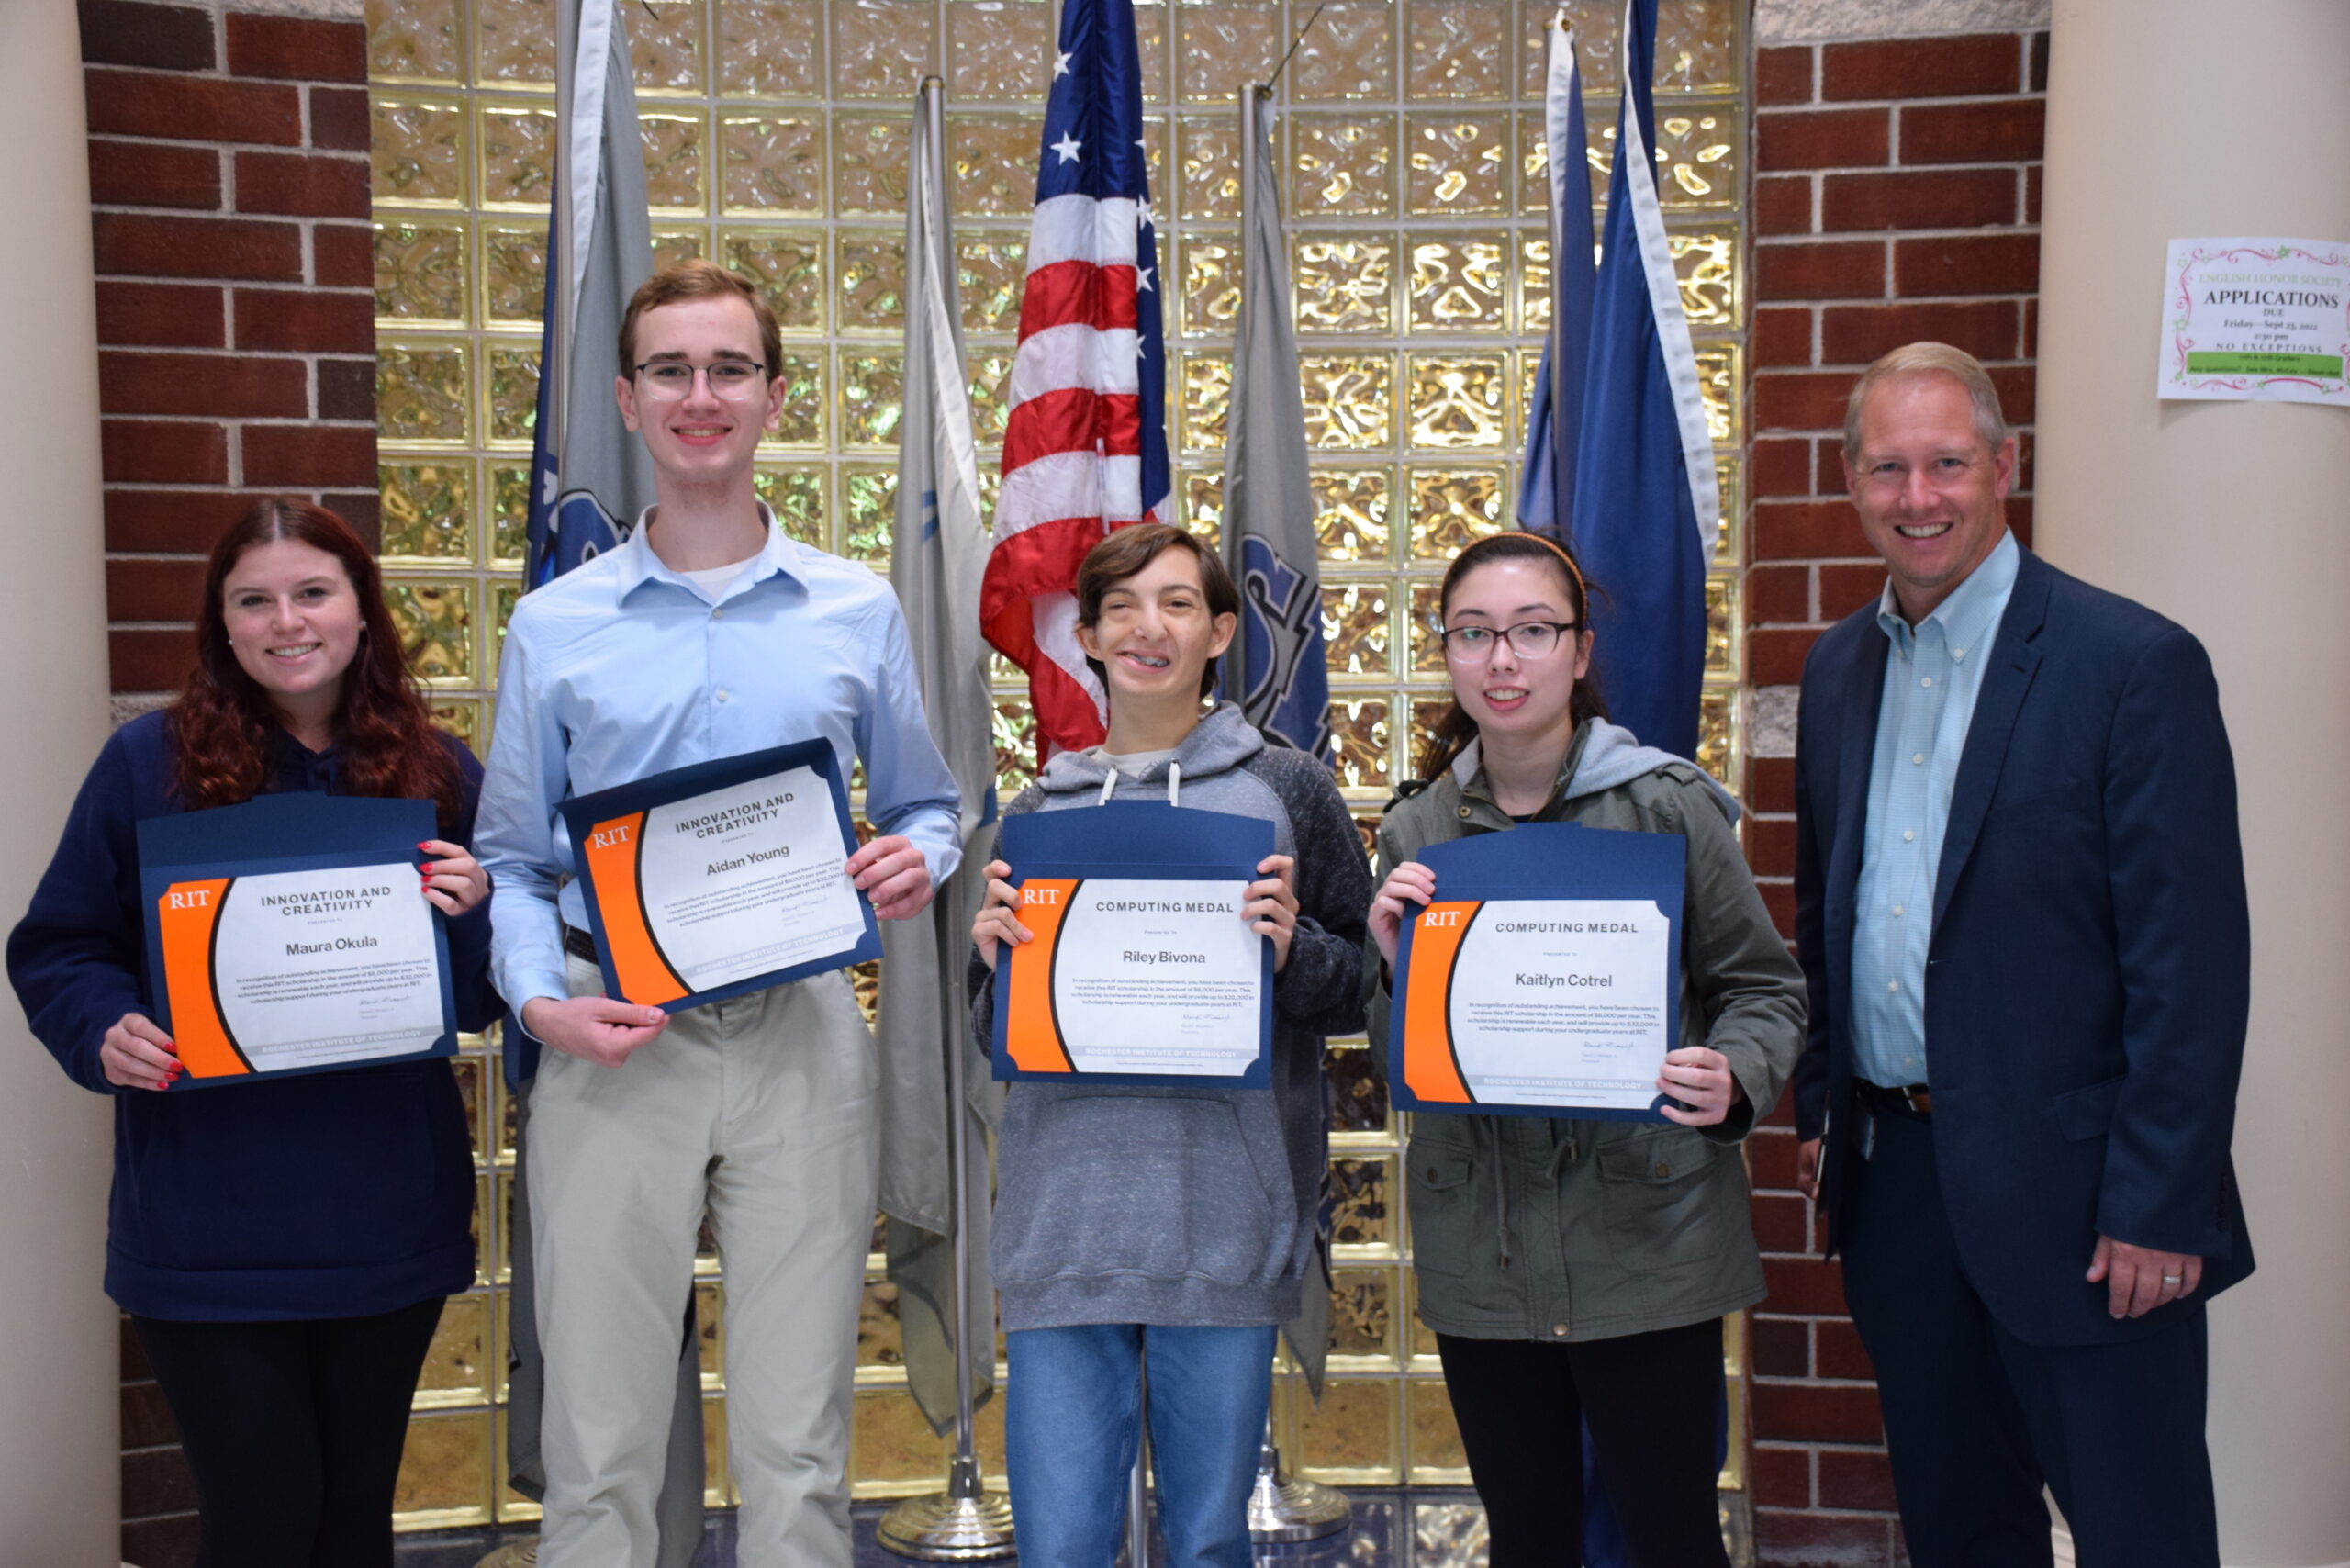 Eastport-South Manor seniors recently earned awards from the Rochester Institute of Technology. Maura Okula and Aidan Young received the Innovation and Creativity Award, while Riley Bivona and Kaitlyn Cotrel, earned the RIT Computing Medal Scholarship. Principal Salvatore Alaimo offered his congratulations.  COURTESY EASTPORT-SOUTH MANOR SCHOOL DISTRICT